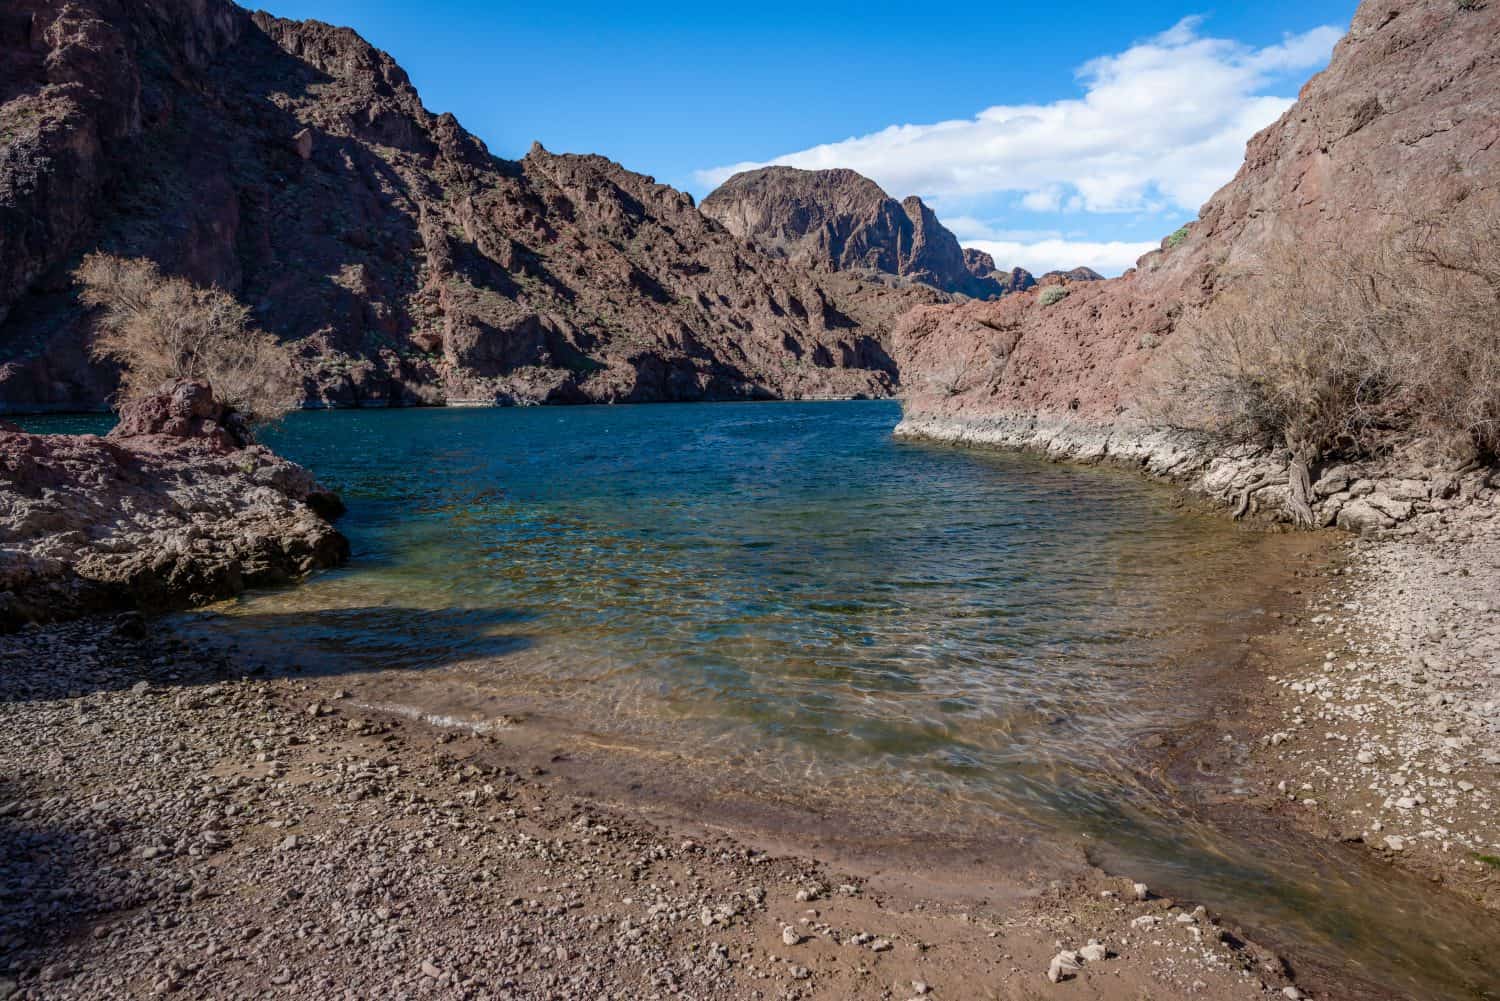 USA, Arizona, Mohave County, Lake Mead National Recreation Area. Water from Arizona Hot Spring flowing into Colorado River near White Rock Canyon